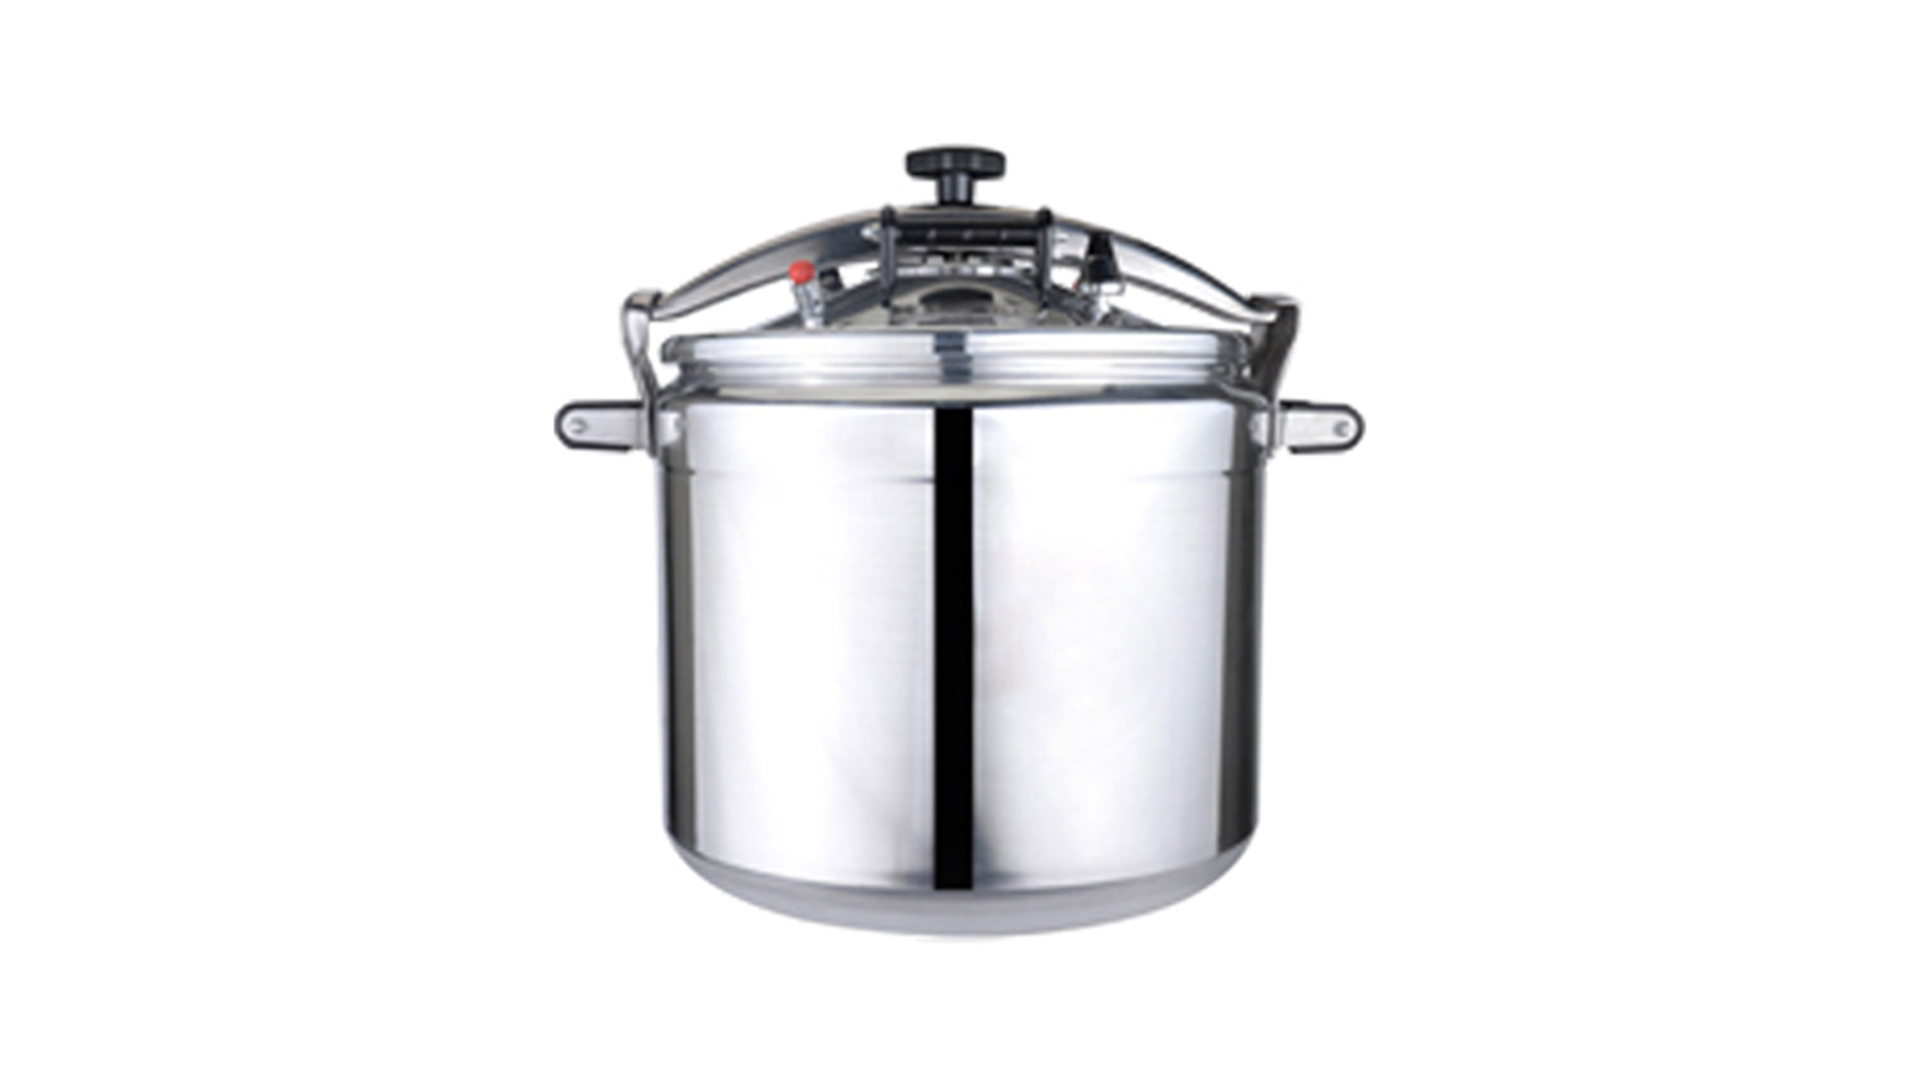 60LAluminium Autoclave Commercial Gas Cooking Rice In Industrial Wholesale Aluminum Alloy Explosion-proof Pressure Cooker